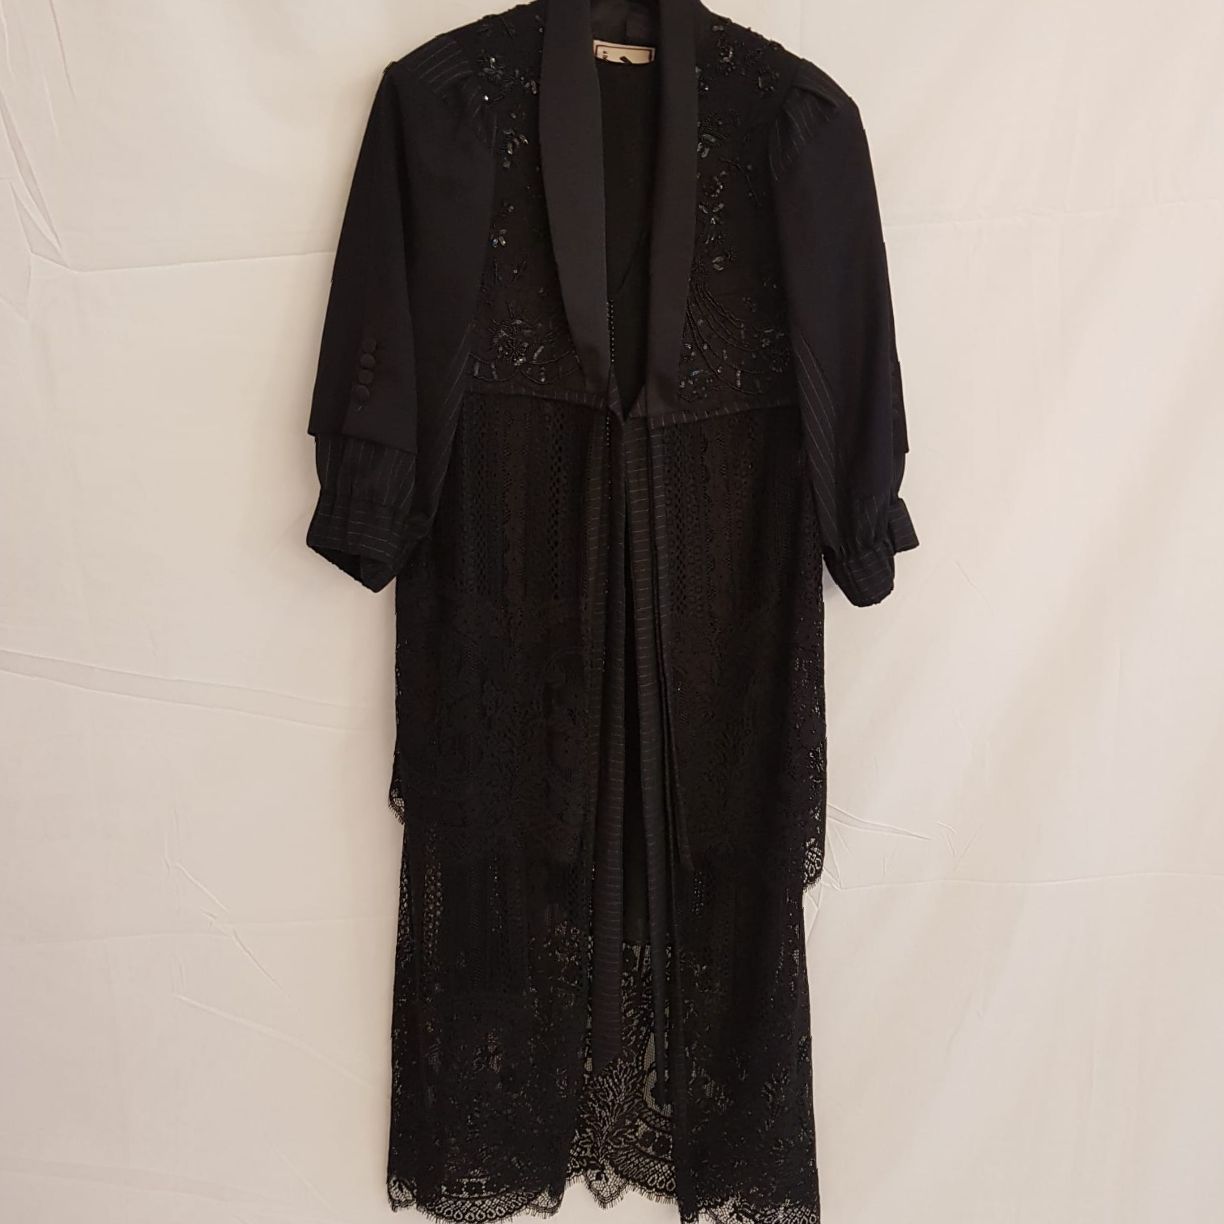 DONNA Les Boutiques - Dress with Coatdress lace and embroidery